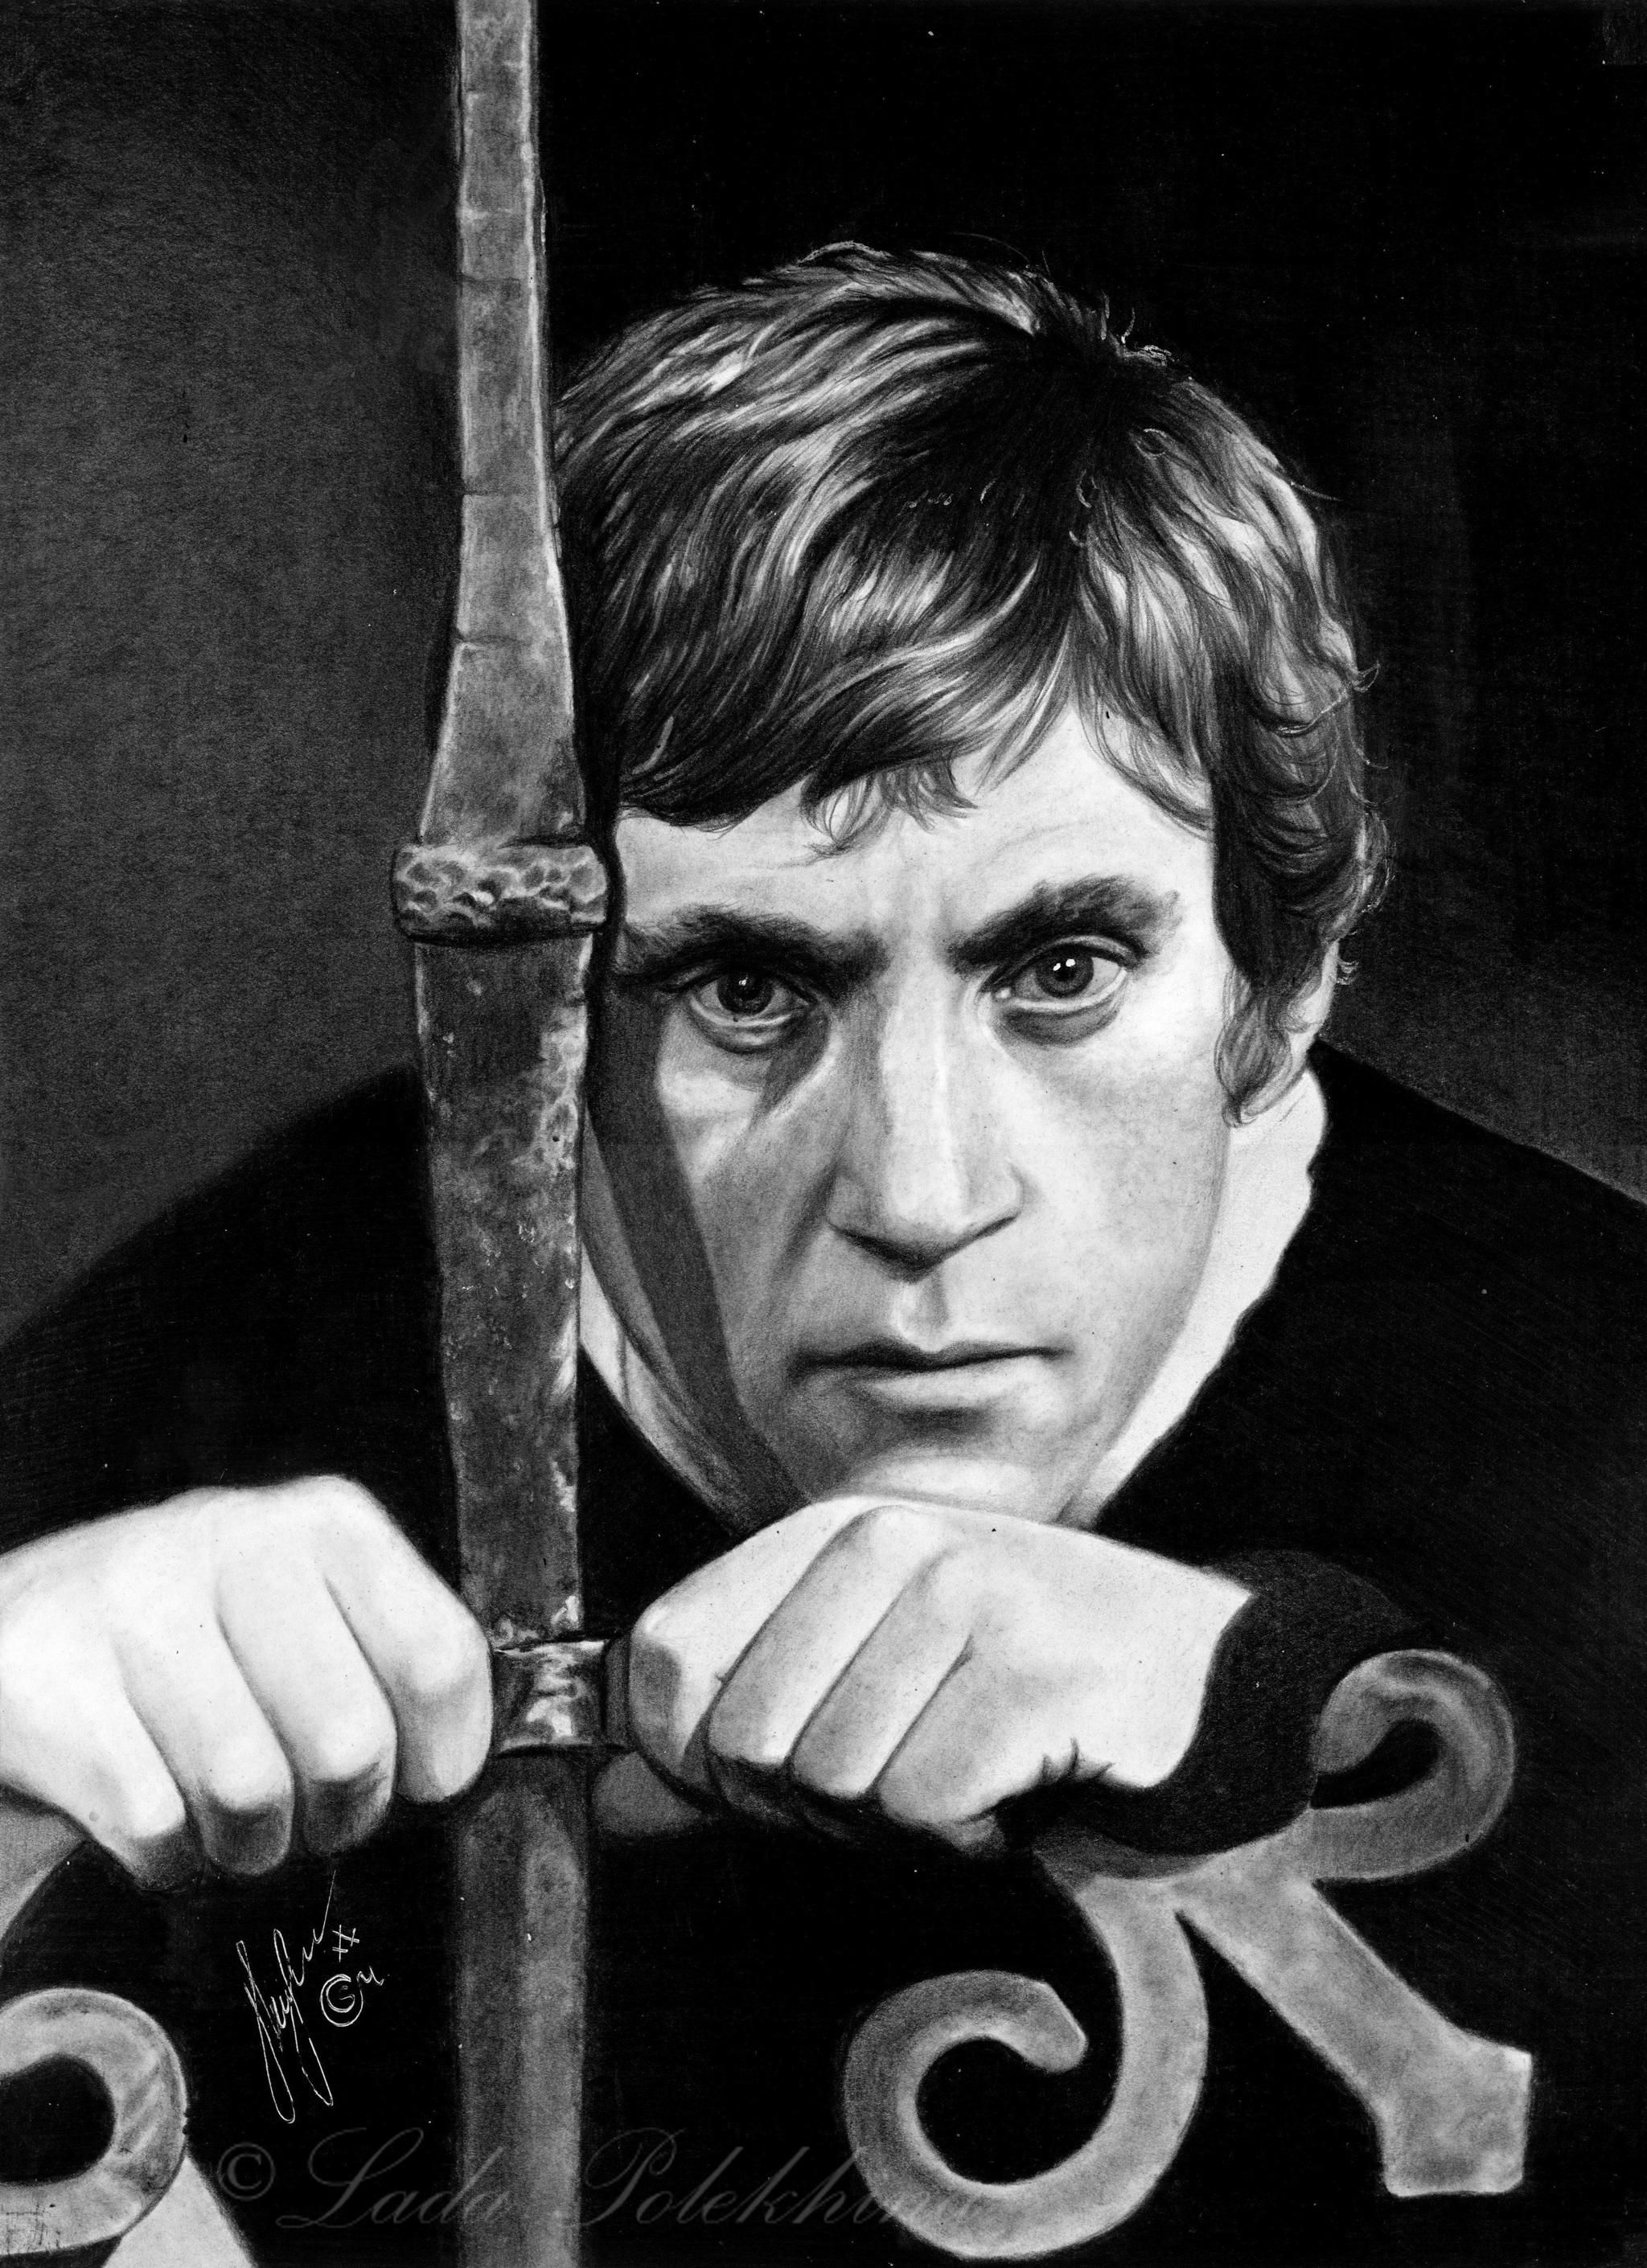 Post #7979393 - My, Portrait, Drawing, Pencil drawing, Graphics, Vladimir Vysotsky, Hamlet, The singers, Поэт, Celebrities, Musicians